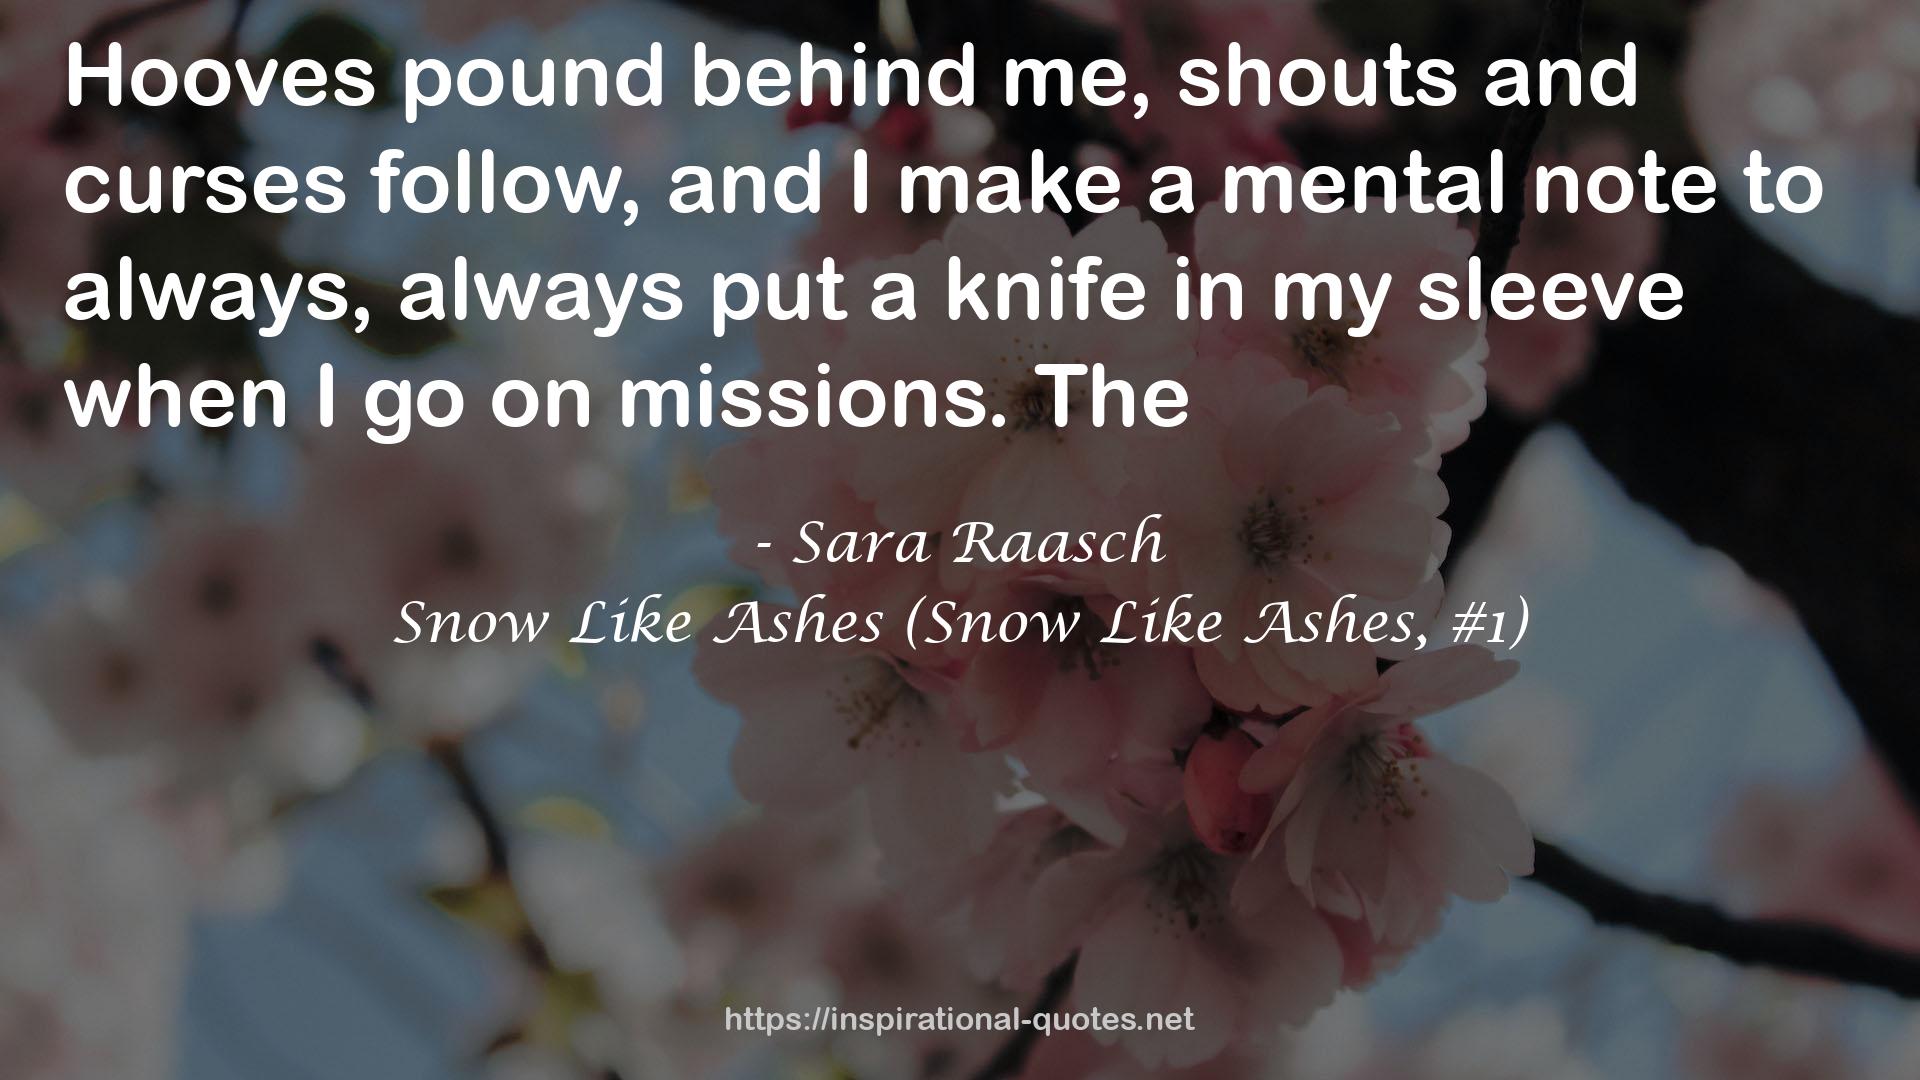 Snow Like Ashes (Snow Like Ashes, #1) QUOTES